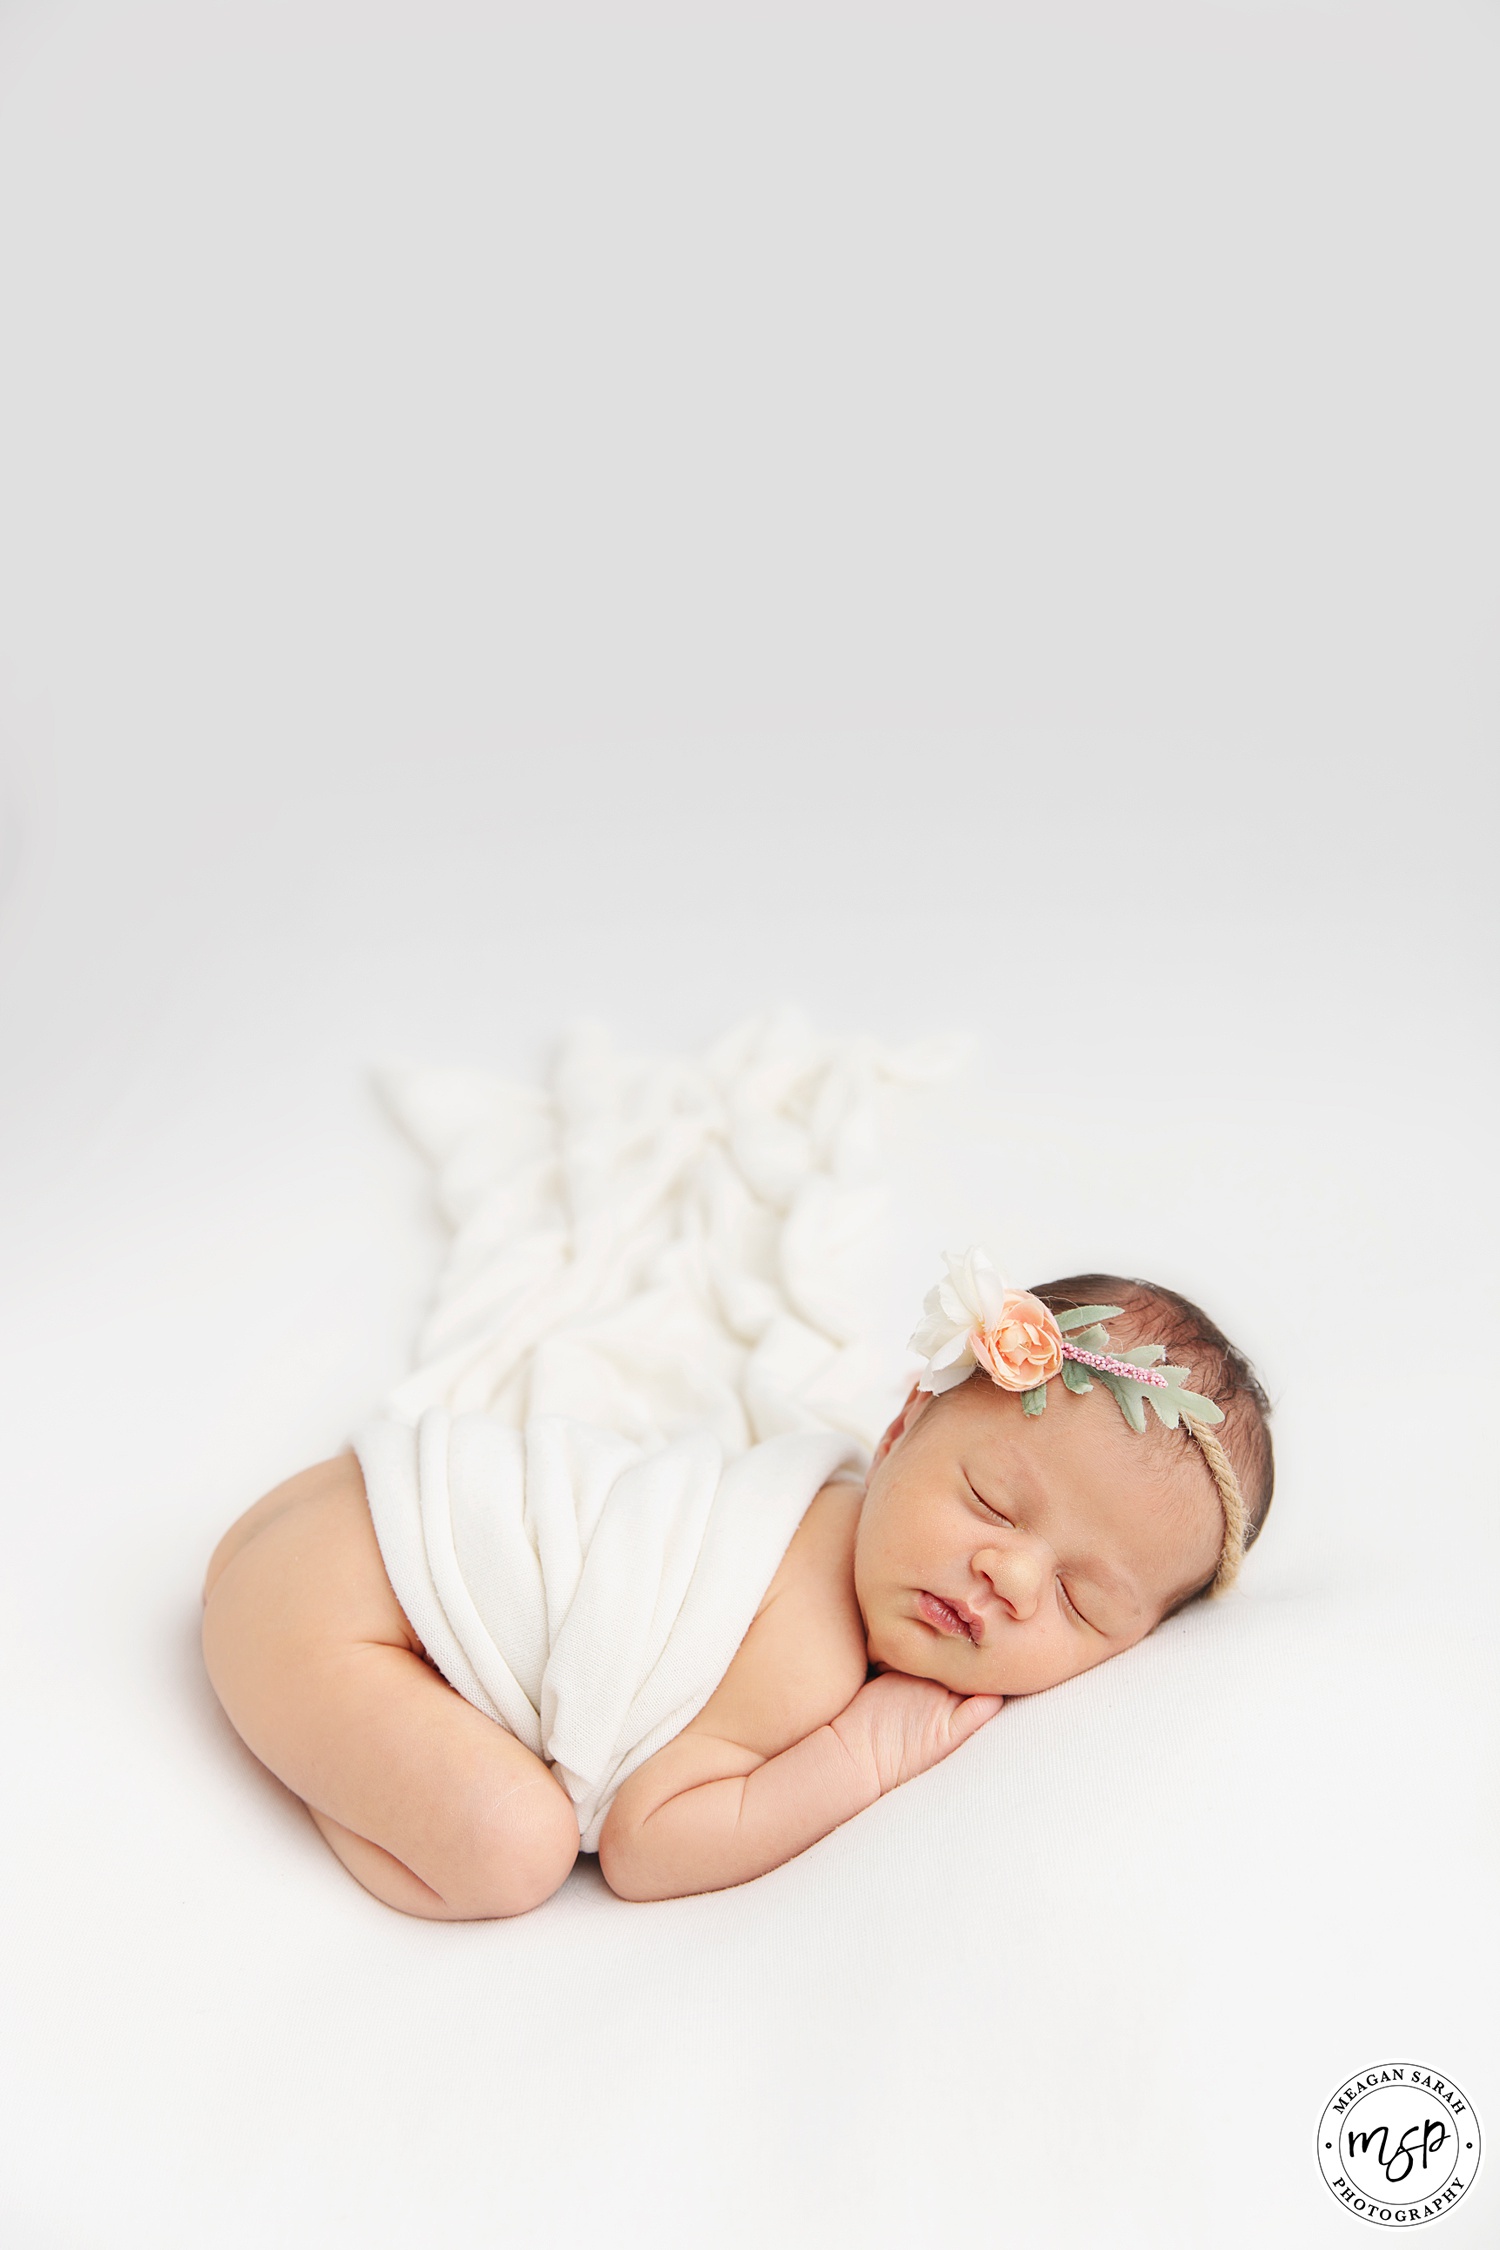 White,Yorkshire Newborn Photography,Yorkshire Newborn Photographer,West Yorkshire Photographer,Professional Photographer in Leeds,Pictures of Babies,Photography,Newborn Pictures,Newborn Photography,Newborn Photographs,Newborn Little Ones,Newborn Little Boy,Newborn Ideas,Newborn Baby Photography,Newborn Babies,Newborn Baby,Meagan Sarah Photography,Leeds Studio Newborn,Leeds Photographer,Leeds Newborn Photography,Leeds Newborn Photographer,Leeds,Cute babies,Girl,Swaddle,Headband,